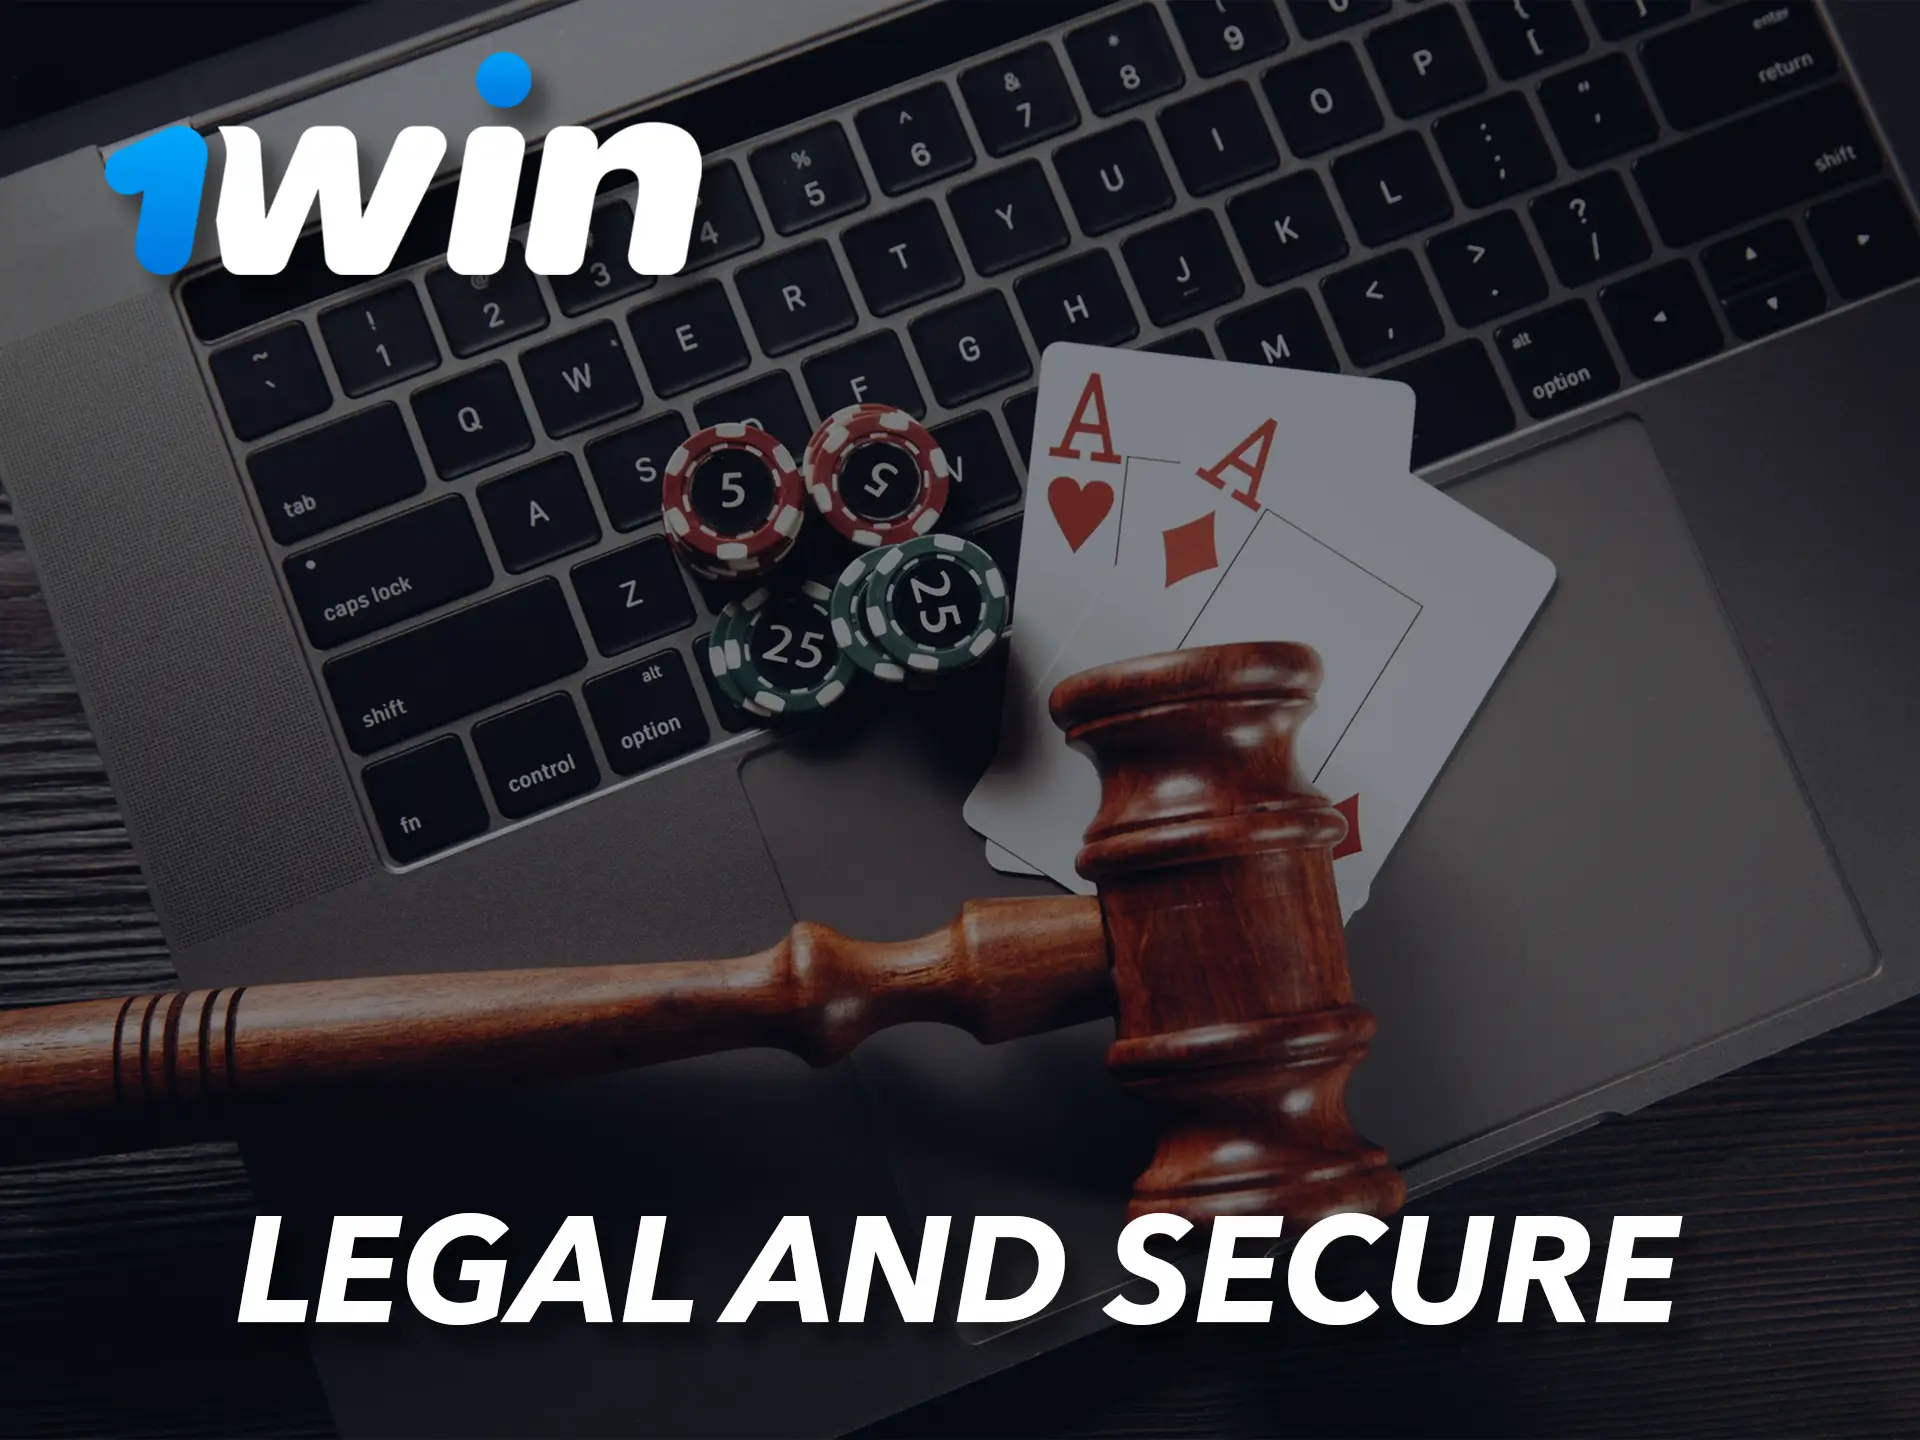 1Win Casino is legal and operates with the necessary licences.